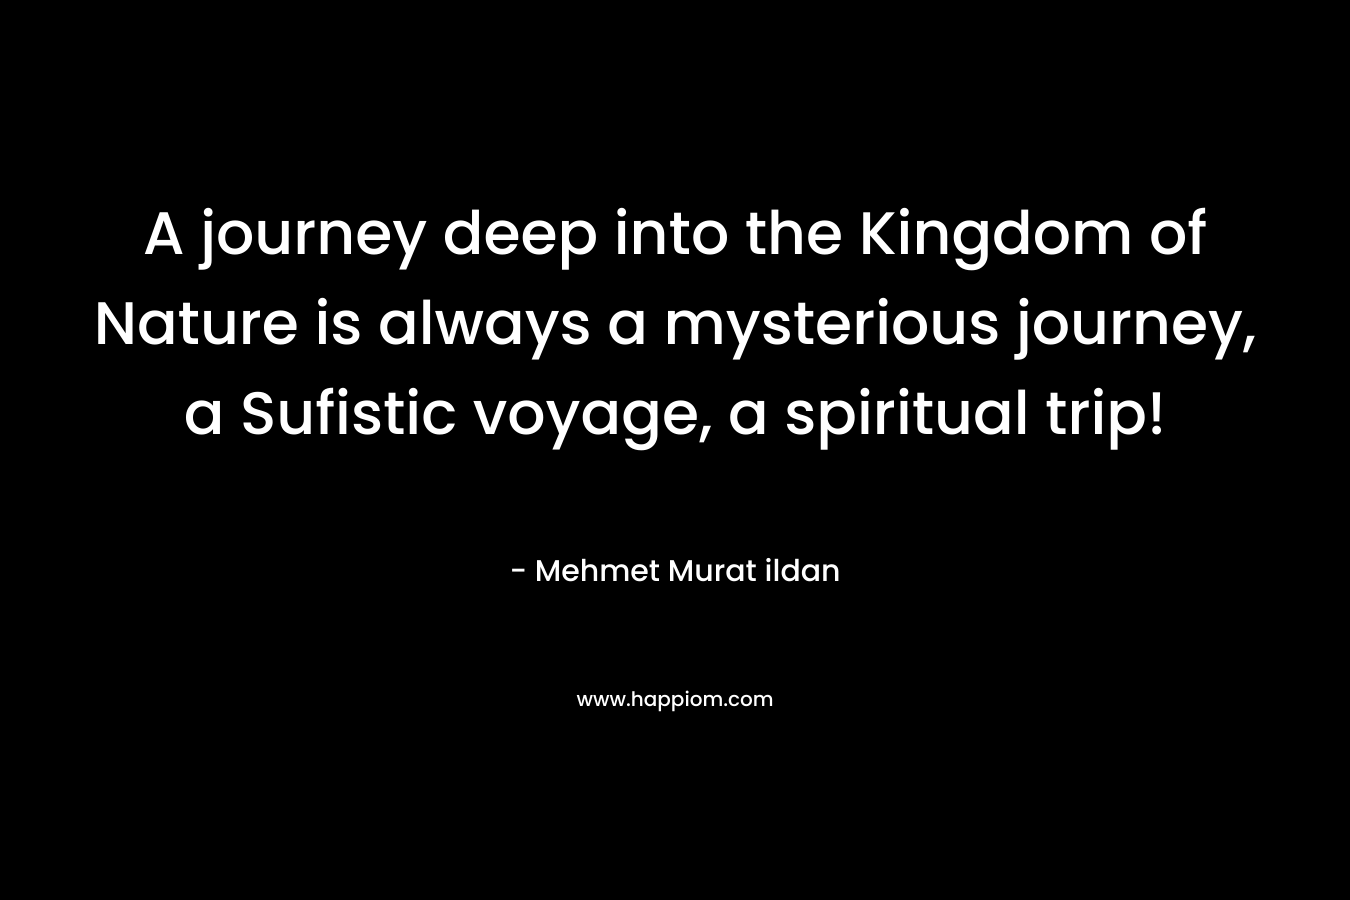 A journey deep into the Kingdom of Nature is always a mysterious journey, a Sufistic voyage, a spiritual trip!